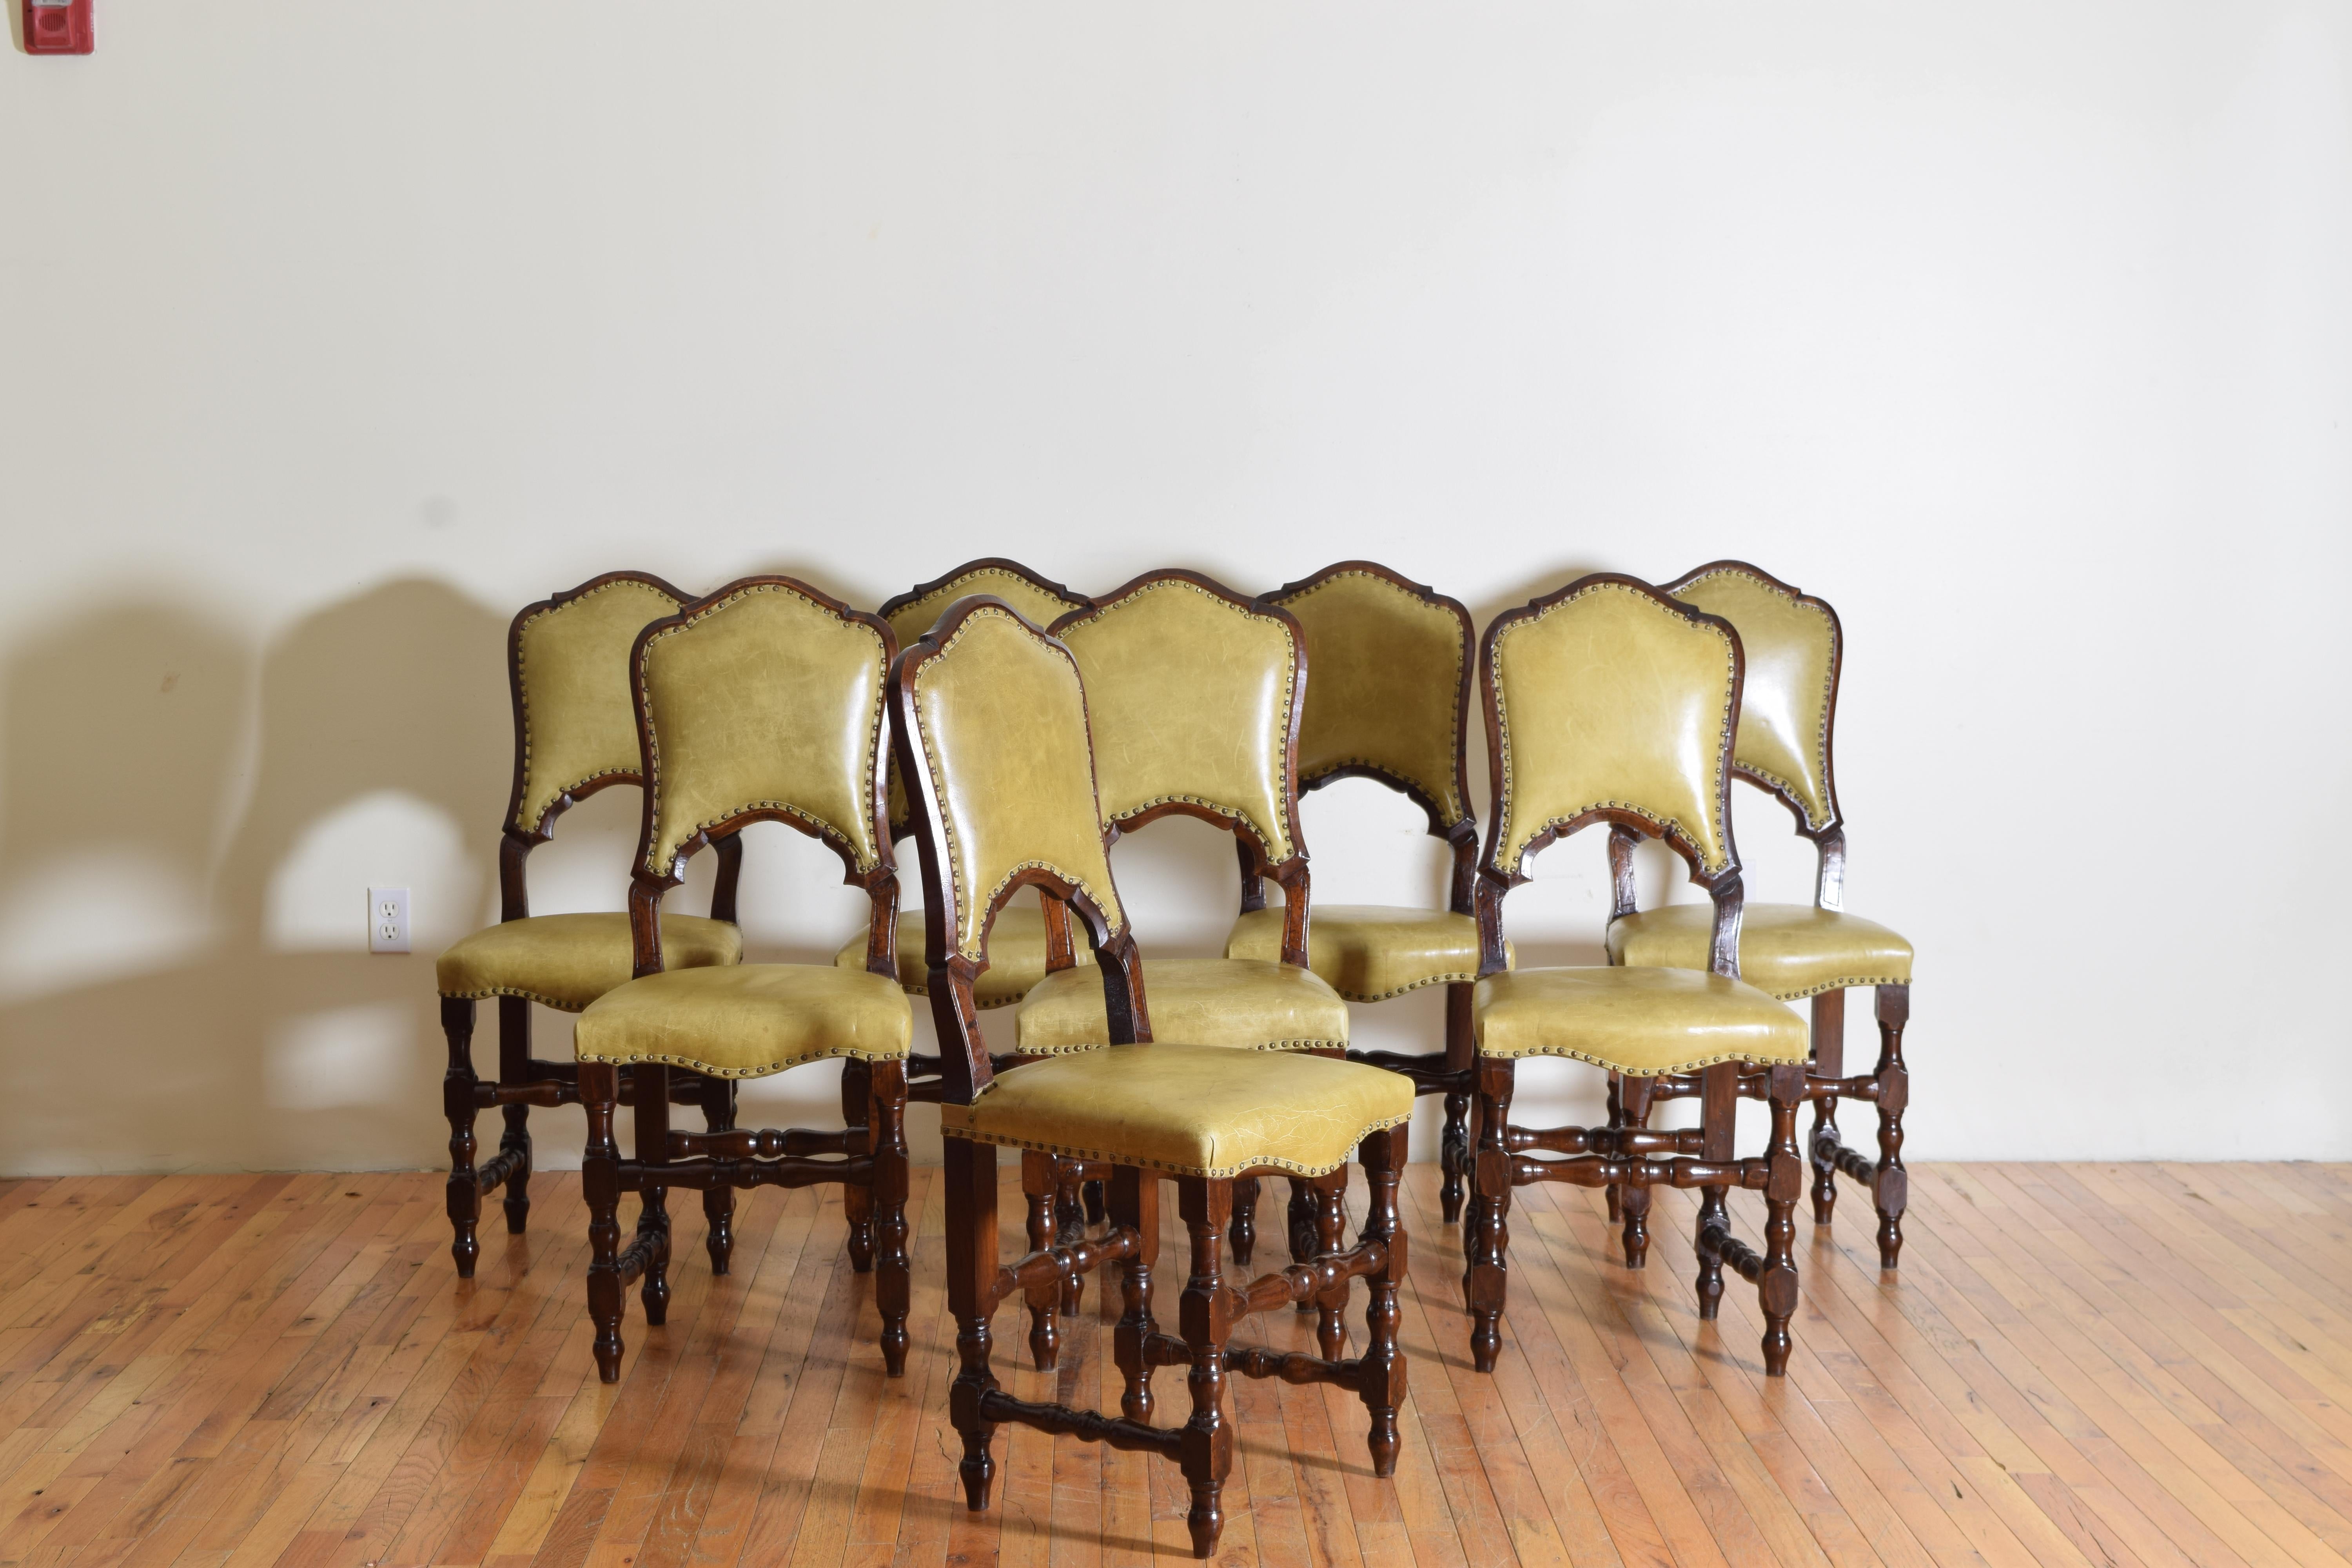 Italian Set of 8 Walnut and Leather Upholstered Dining Chairs, 19th Century